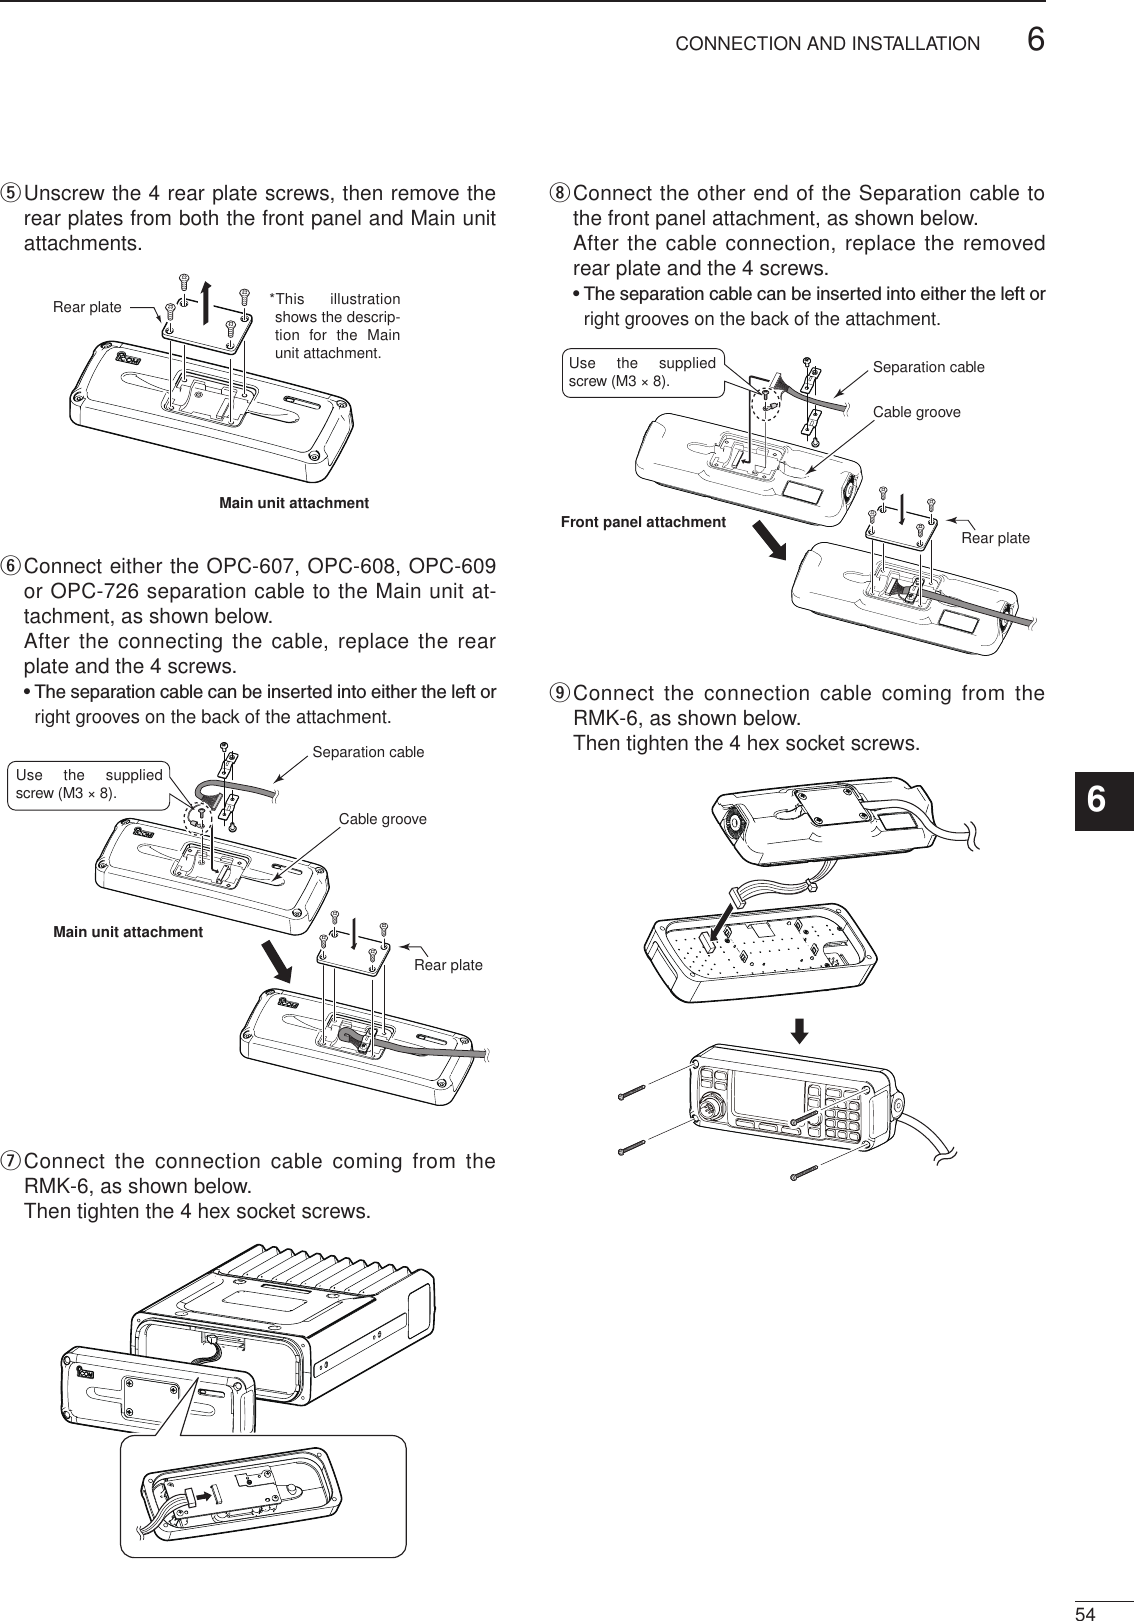 2001 NEW546CONNECTION AND INSTALLATION1234567891011121314151617Quick Referencet  Unscrew the 4 rear plate screws, then remove the rear plates from both the front panel and Main unit attachments.Rear plate *This illustration shows the descrip-tion for  the Main unit attachment.Main unit attachmenty  Connect either the OPC-607, OPC-608, OPC-609 or OPC-726 separation cable to the Main unit at-tachment, as shown below.   After the connecting the cable, replace the rear plate and the 4 screws.  •  The separation cable can be inserted into either the left or right grooves on the back of the attachment.Use the supplied screw (M3 × 8).Rear plateMain unit attachmentCable grooveSeparation cableu  Connect the connection cable coming from  the RMK-6, as shown below.    Then tighten the 4 hex socket screws.i  Connect the other end of the Separation cable to the front panel attachment, as shown below.   After the cable connection, replace the removed rear plate and the 4 screws.  •  The separation cable can be inserted into either the left or right grooves on the back of the attachment.Rear plateFront panel attachmentCable grooveSeparation cableUse the supplied screw (M3 × 8).o  Connect the connection cable coming from  the RMK-6, as shown below.    Then tighten the 4 hex socket screws.